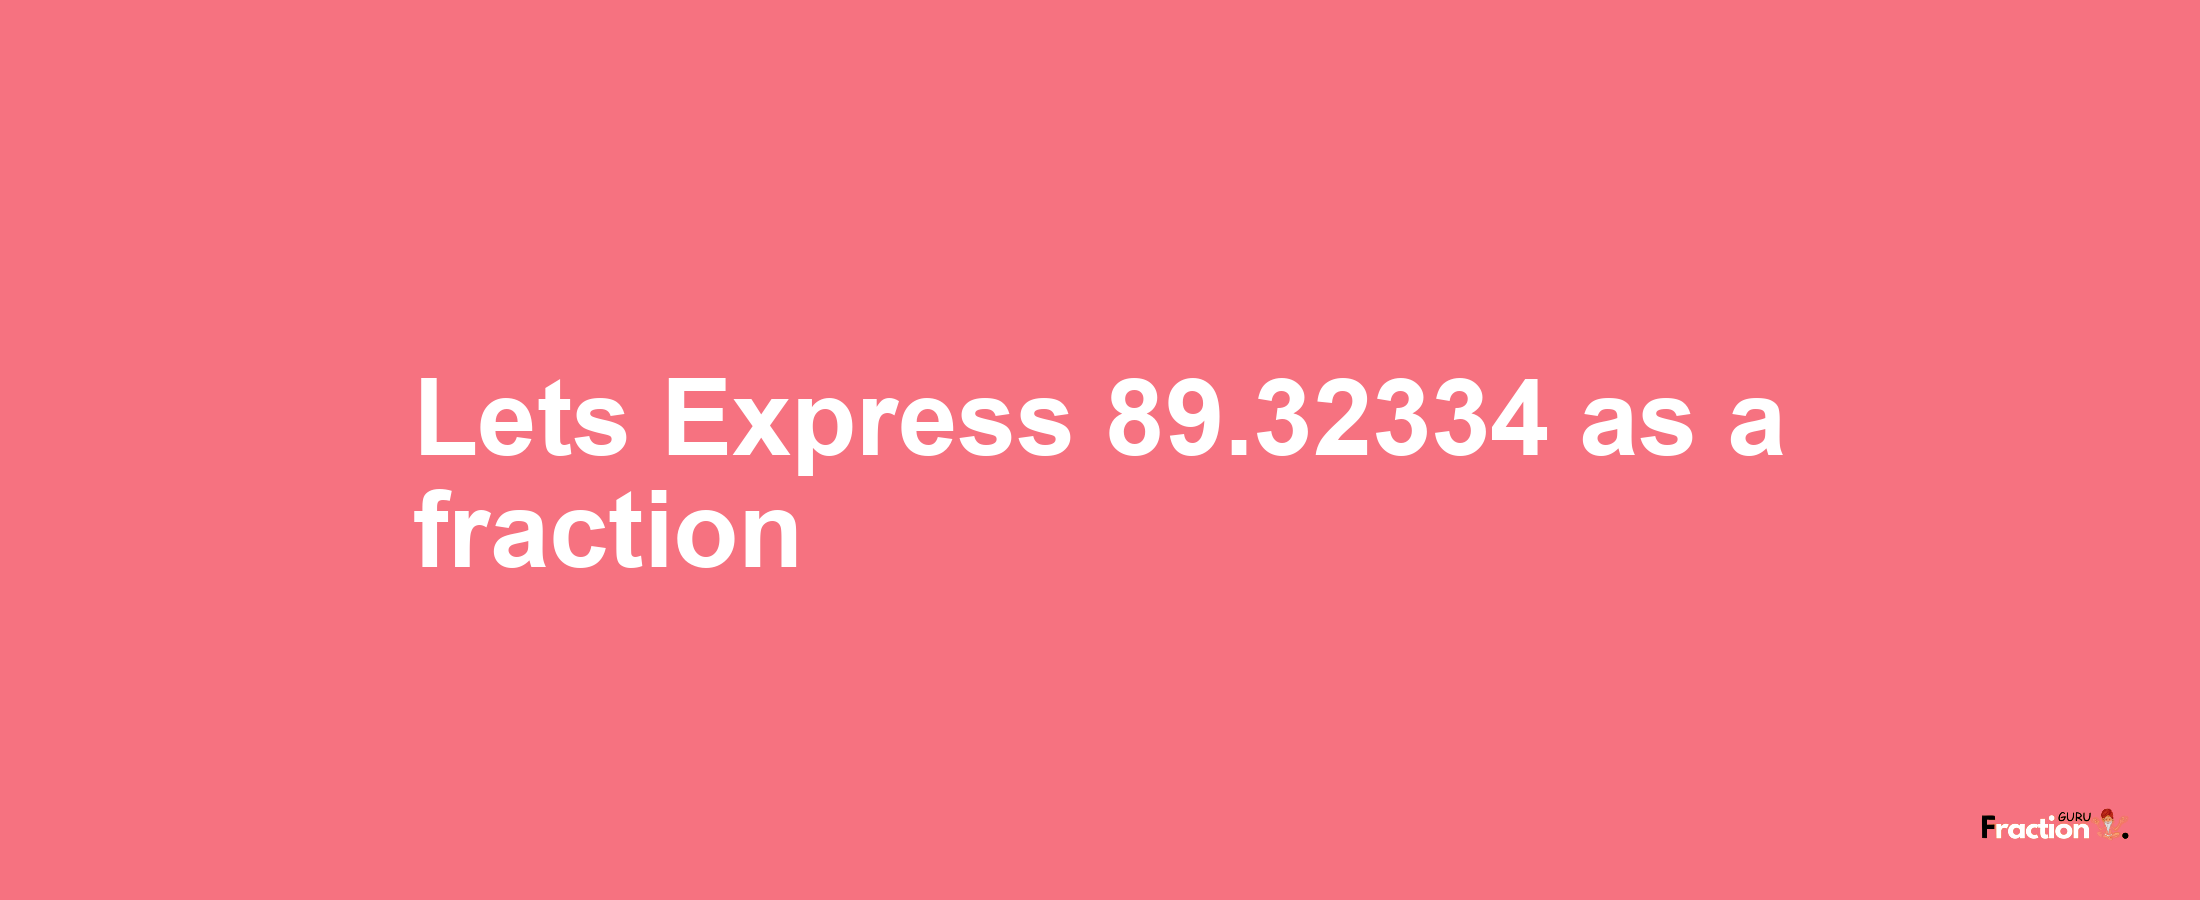 Lets Express 89.32334 as afraction